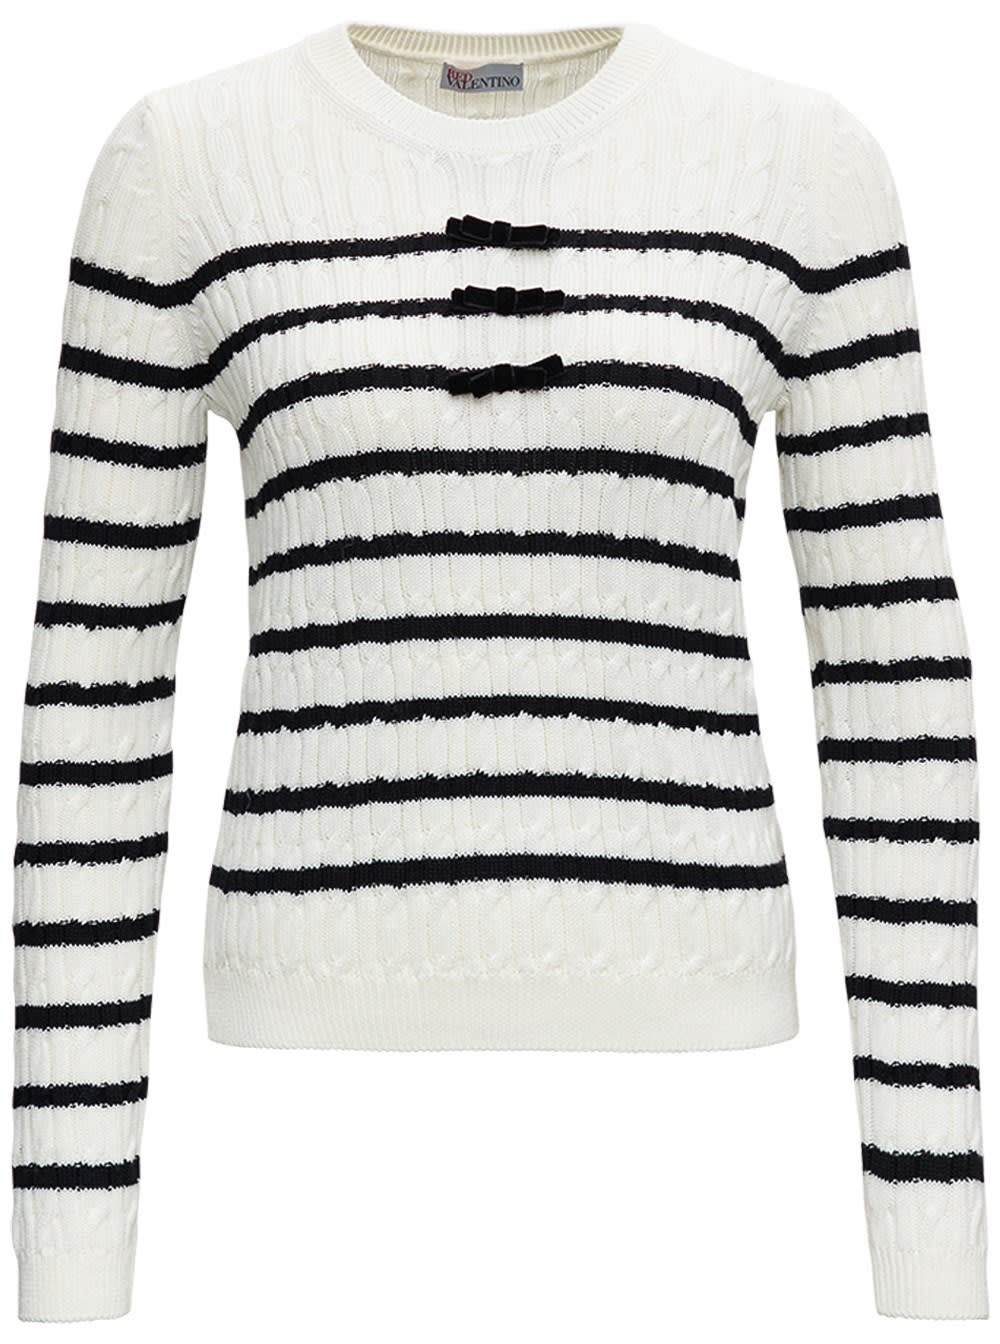 RED Valentino Striped Wool Sweater With Bows Detail